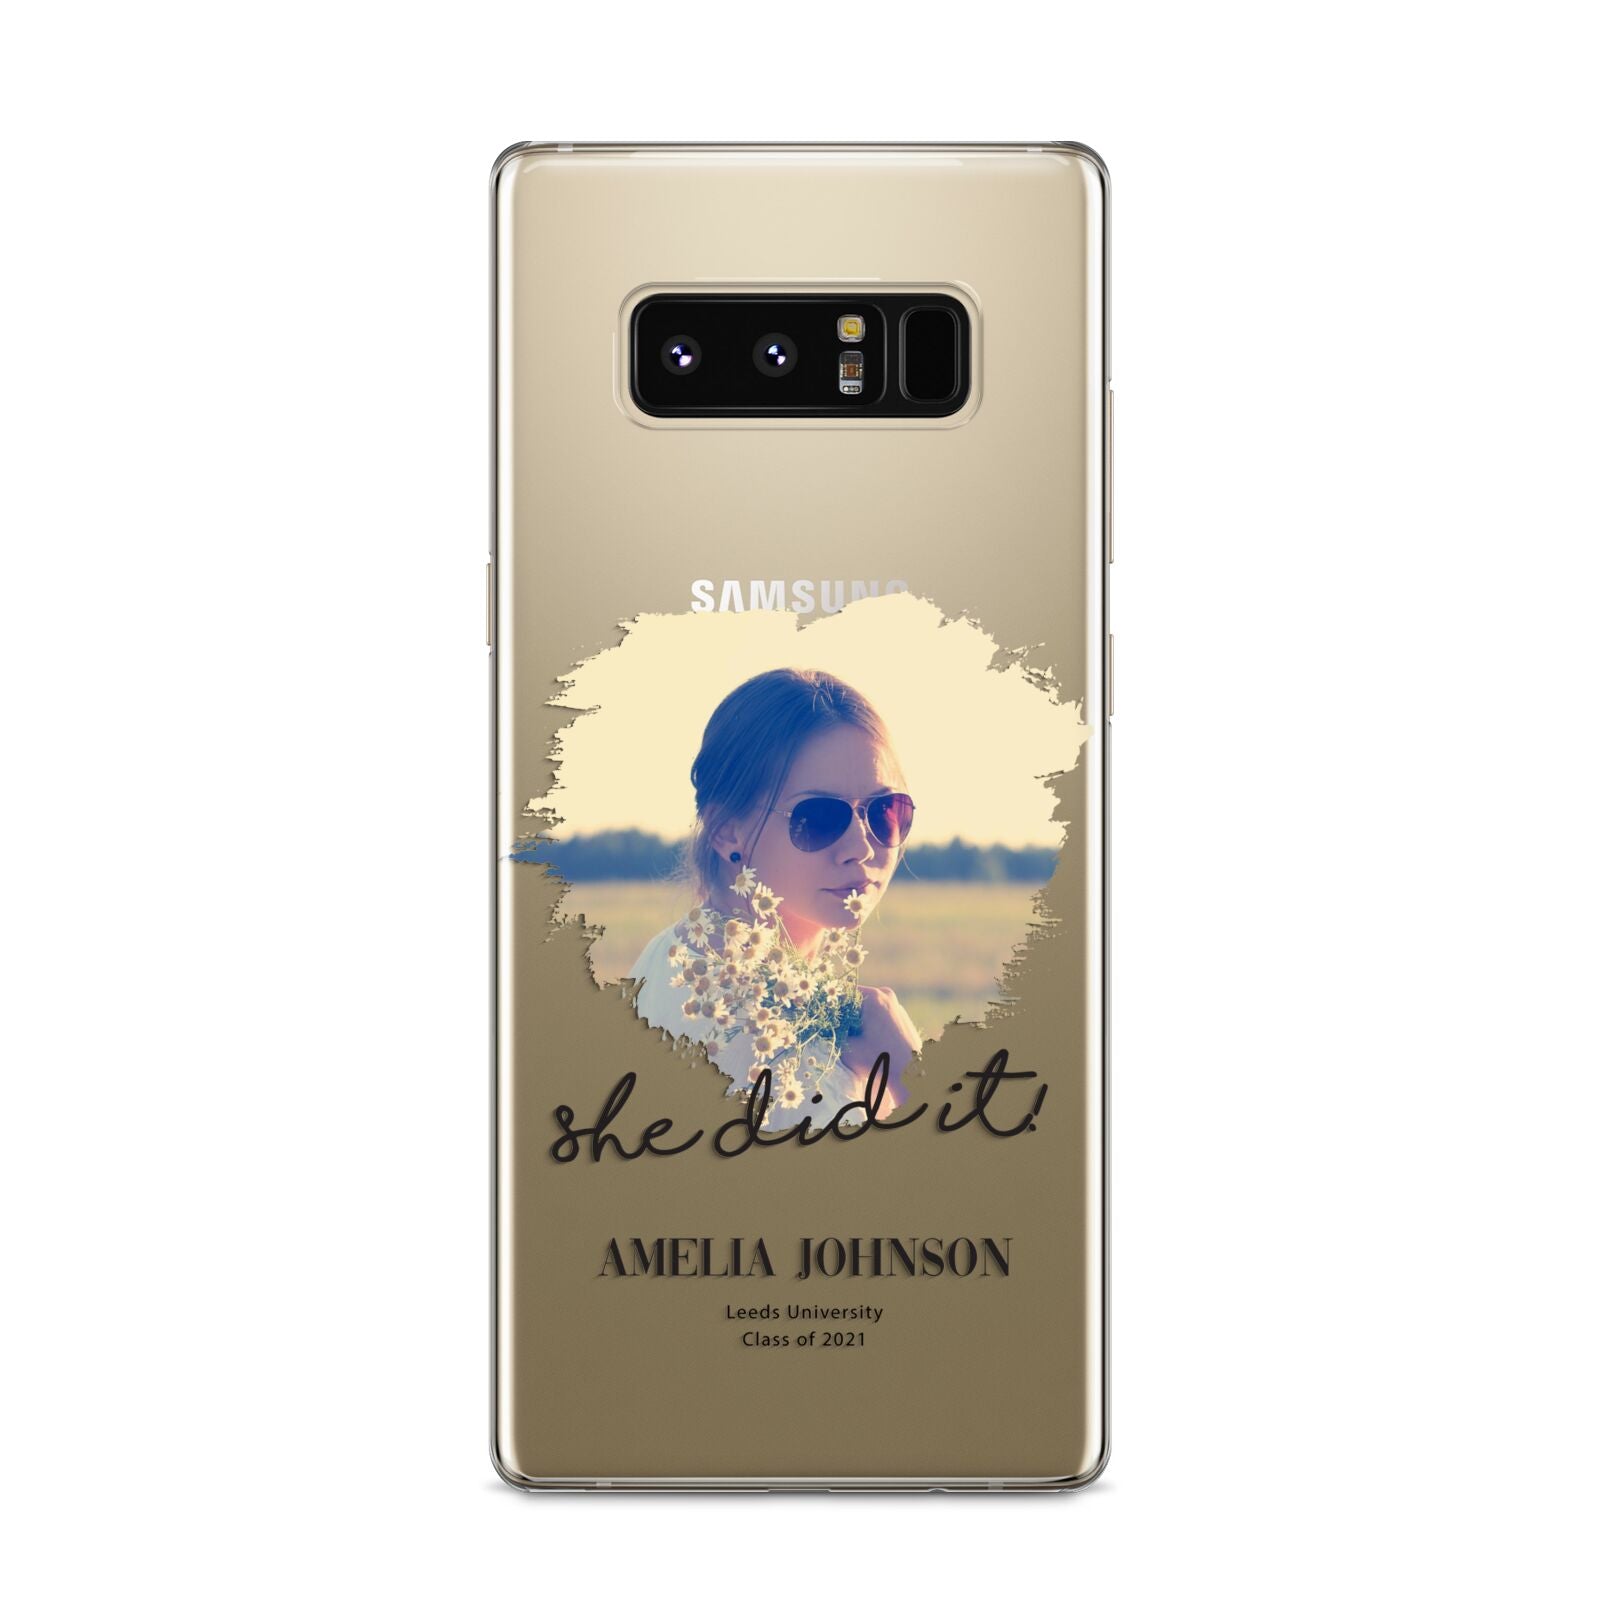 She Did It Graduation Photo with Name Samsung Galaxy S8 Case